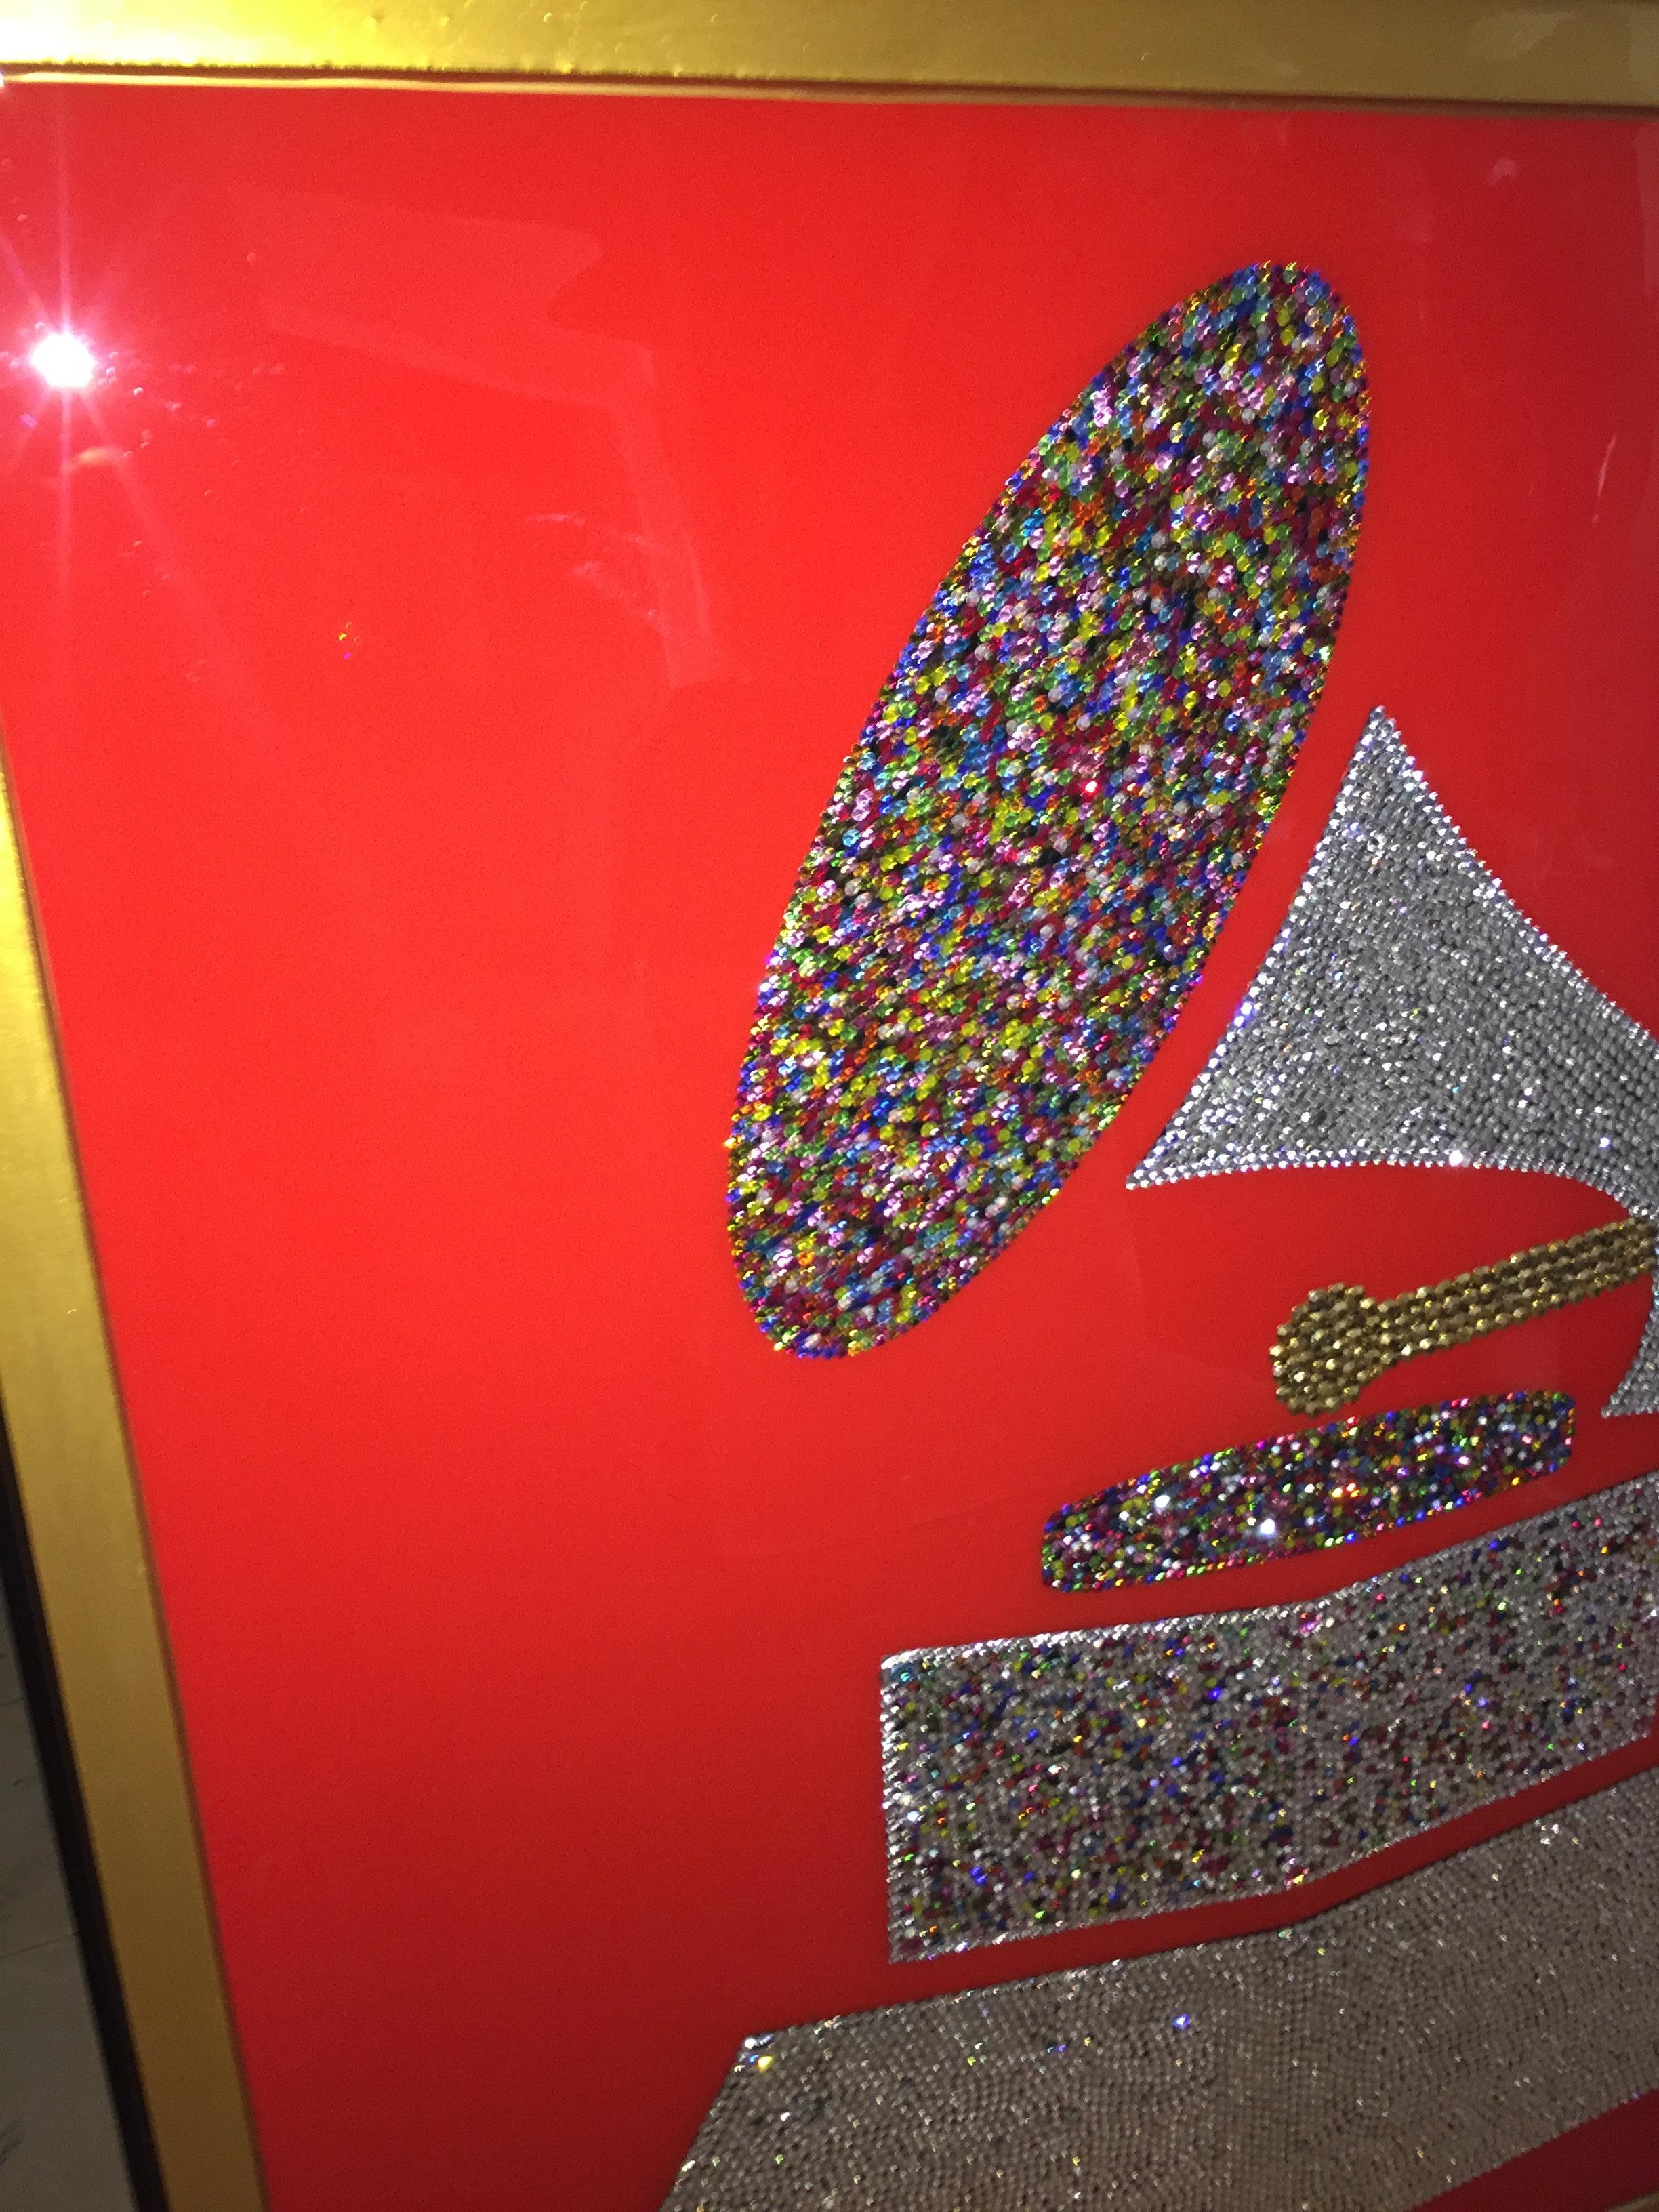 One of a kind piece of art with 10.000+ Swarovski+Czech Crystals placed one by one. The artist took over 2 months to complete it. This Grand Grammy piece celebrates the 60th anniversary of the Grammys. This is already framed, perfect for that